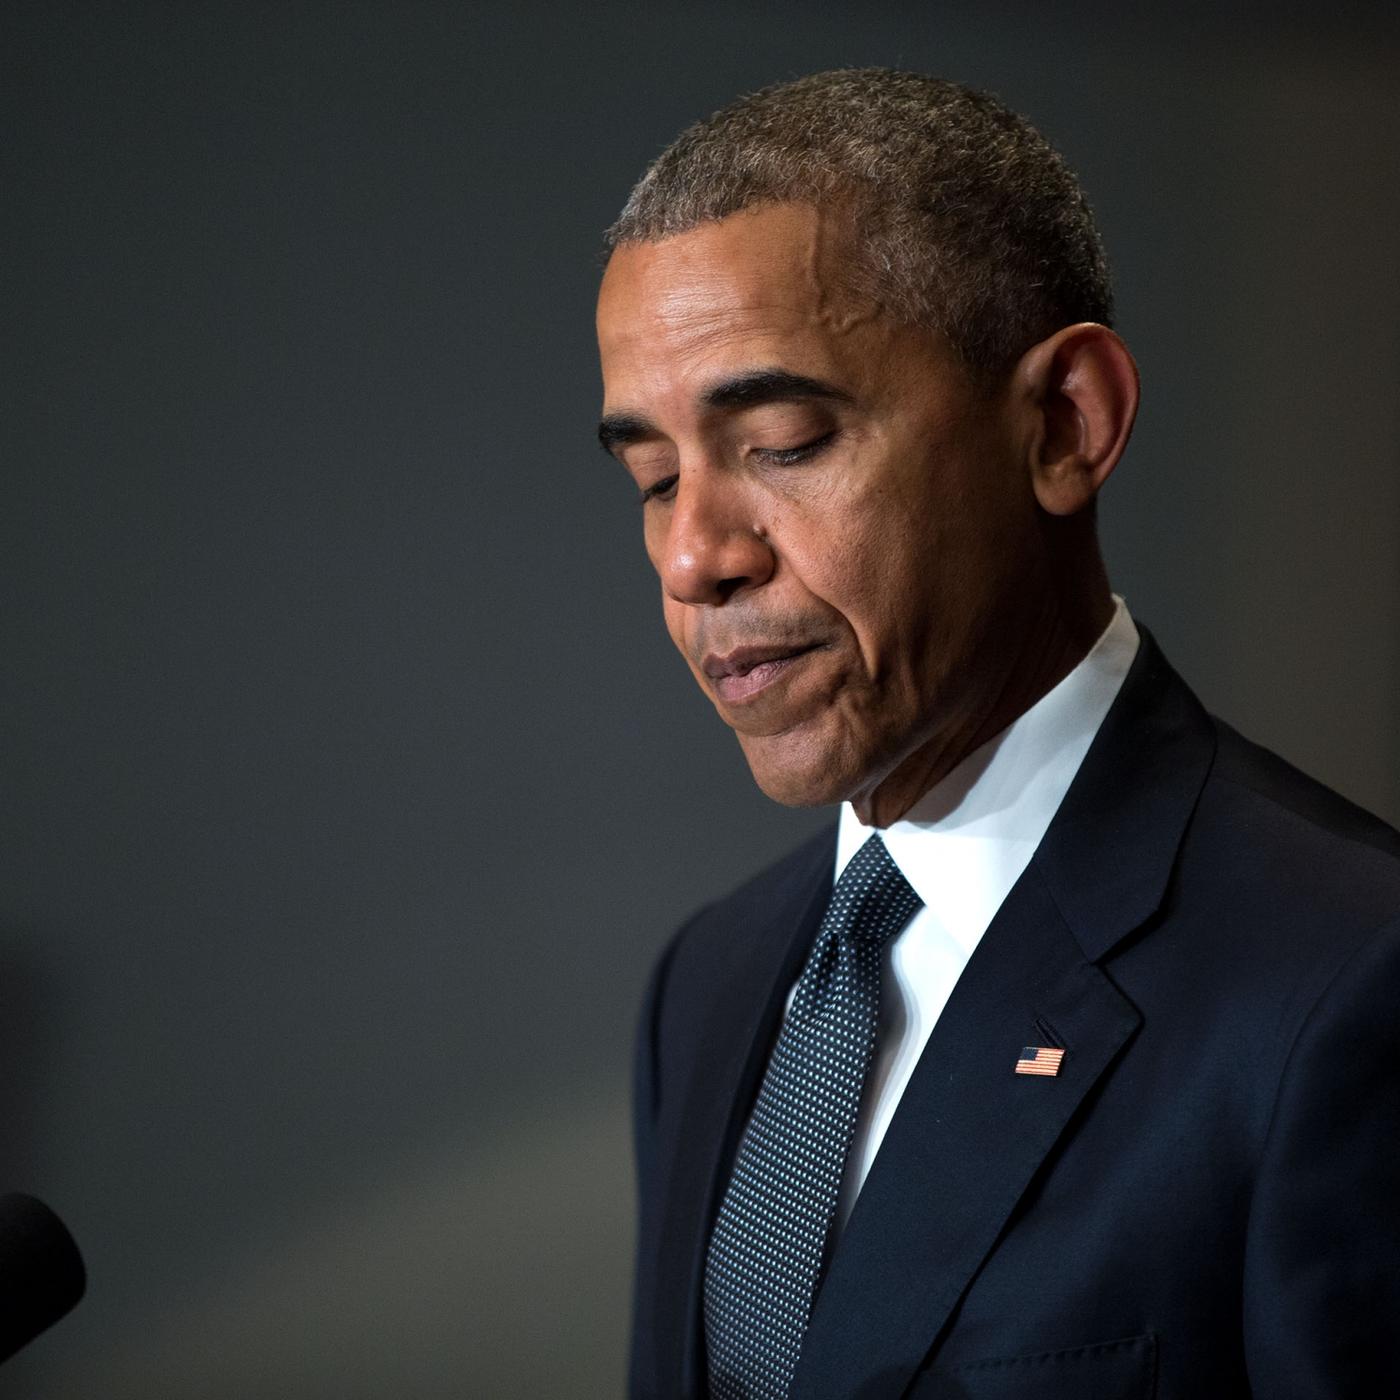 Audio Highlights: President Obama at The Dallas Memorial Service